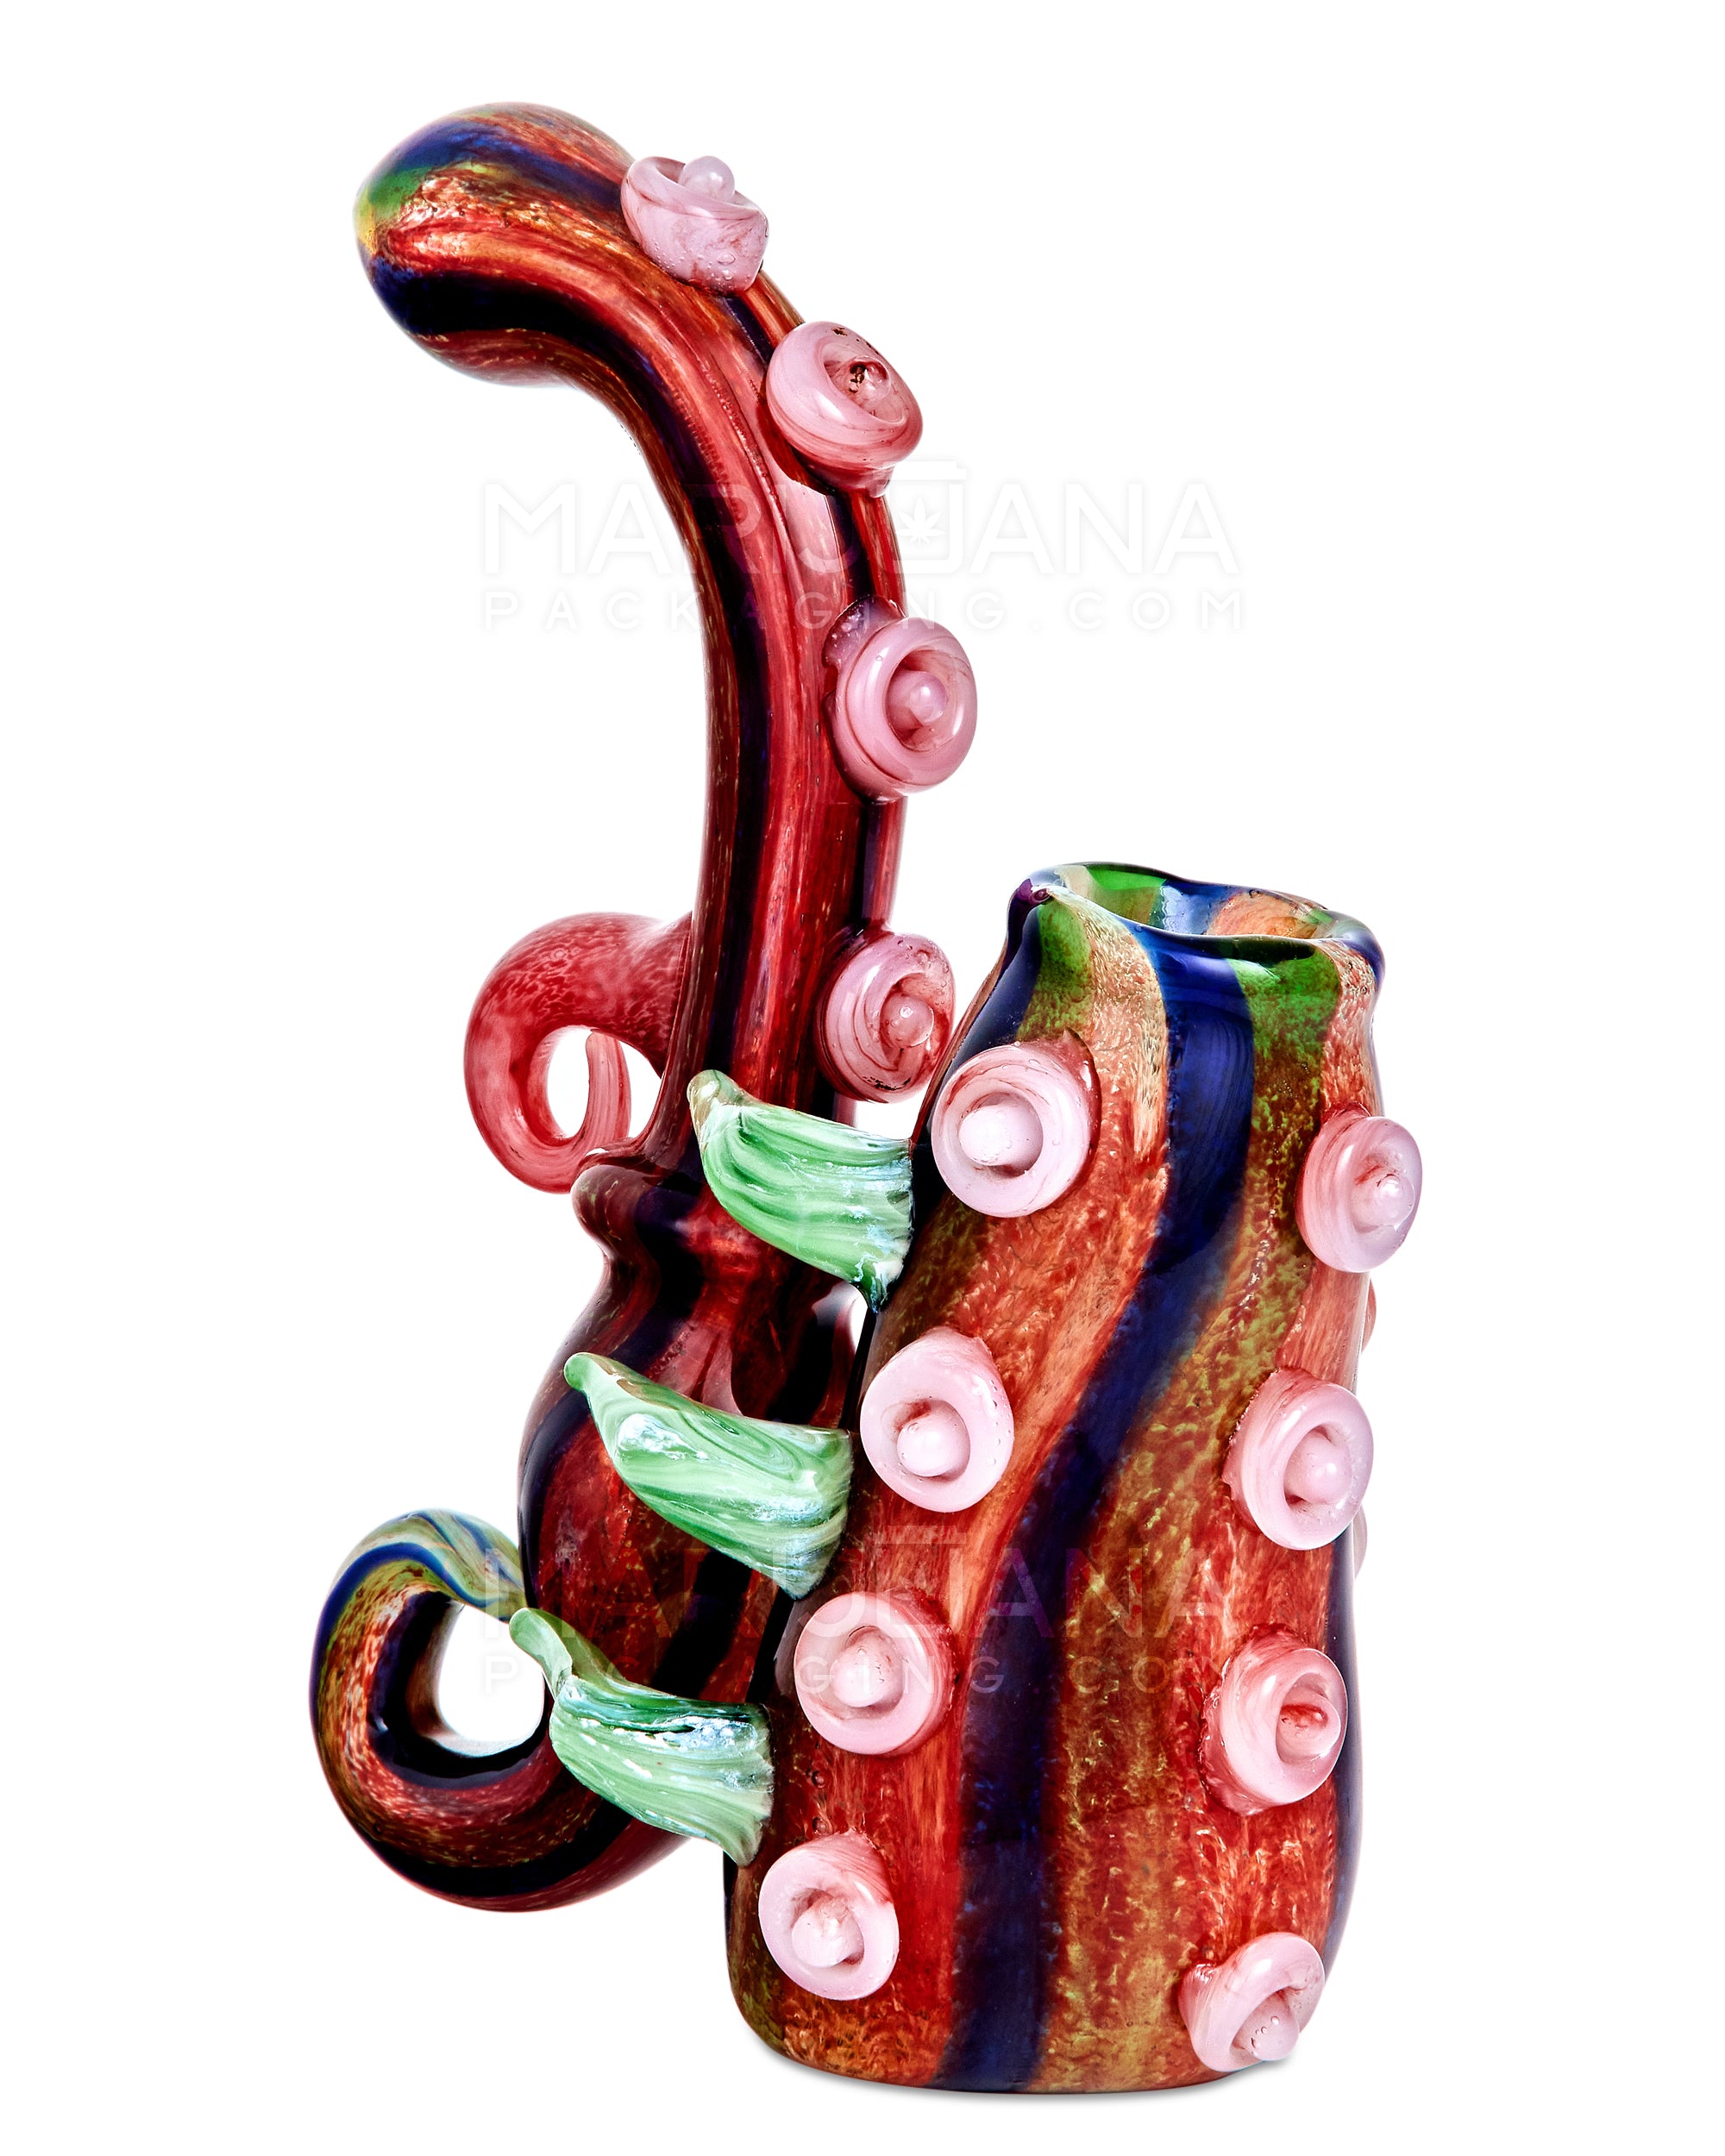 Heady | Striped & Color Pull Kraken Bubbler w/ Triple Horns | 7in Tall - Very Thick Glass - Red - 11